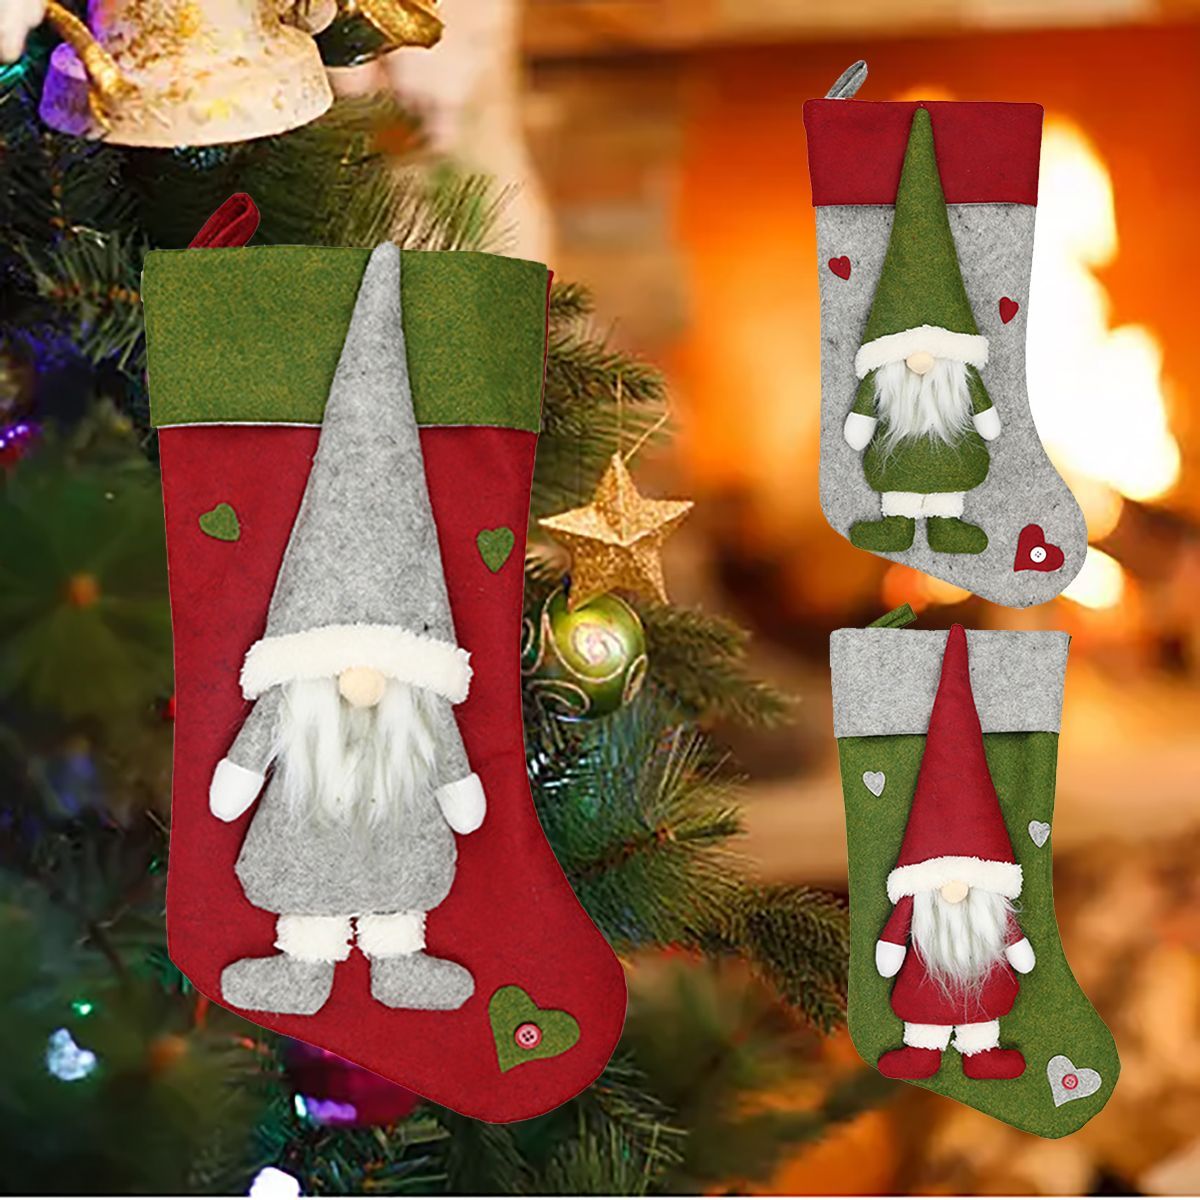 Christmas-Stocking-Gift-with-Hanging-Rope-for-Xmas-Tree-Decoration-Kids-Gift-1573497